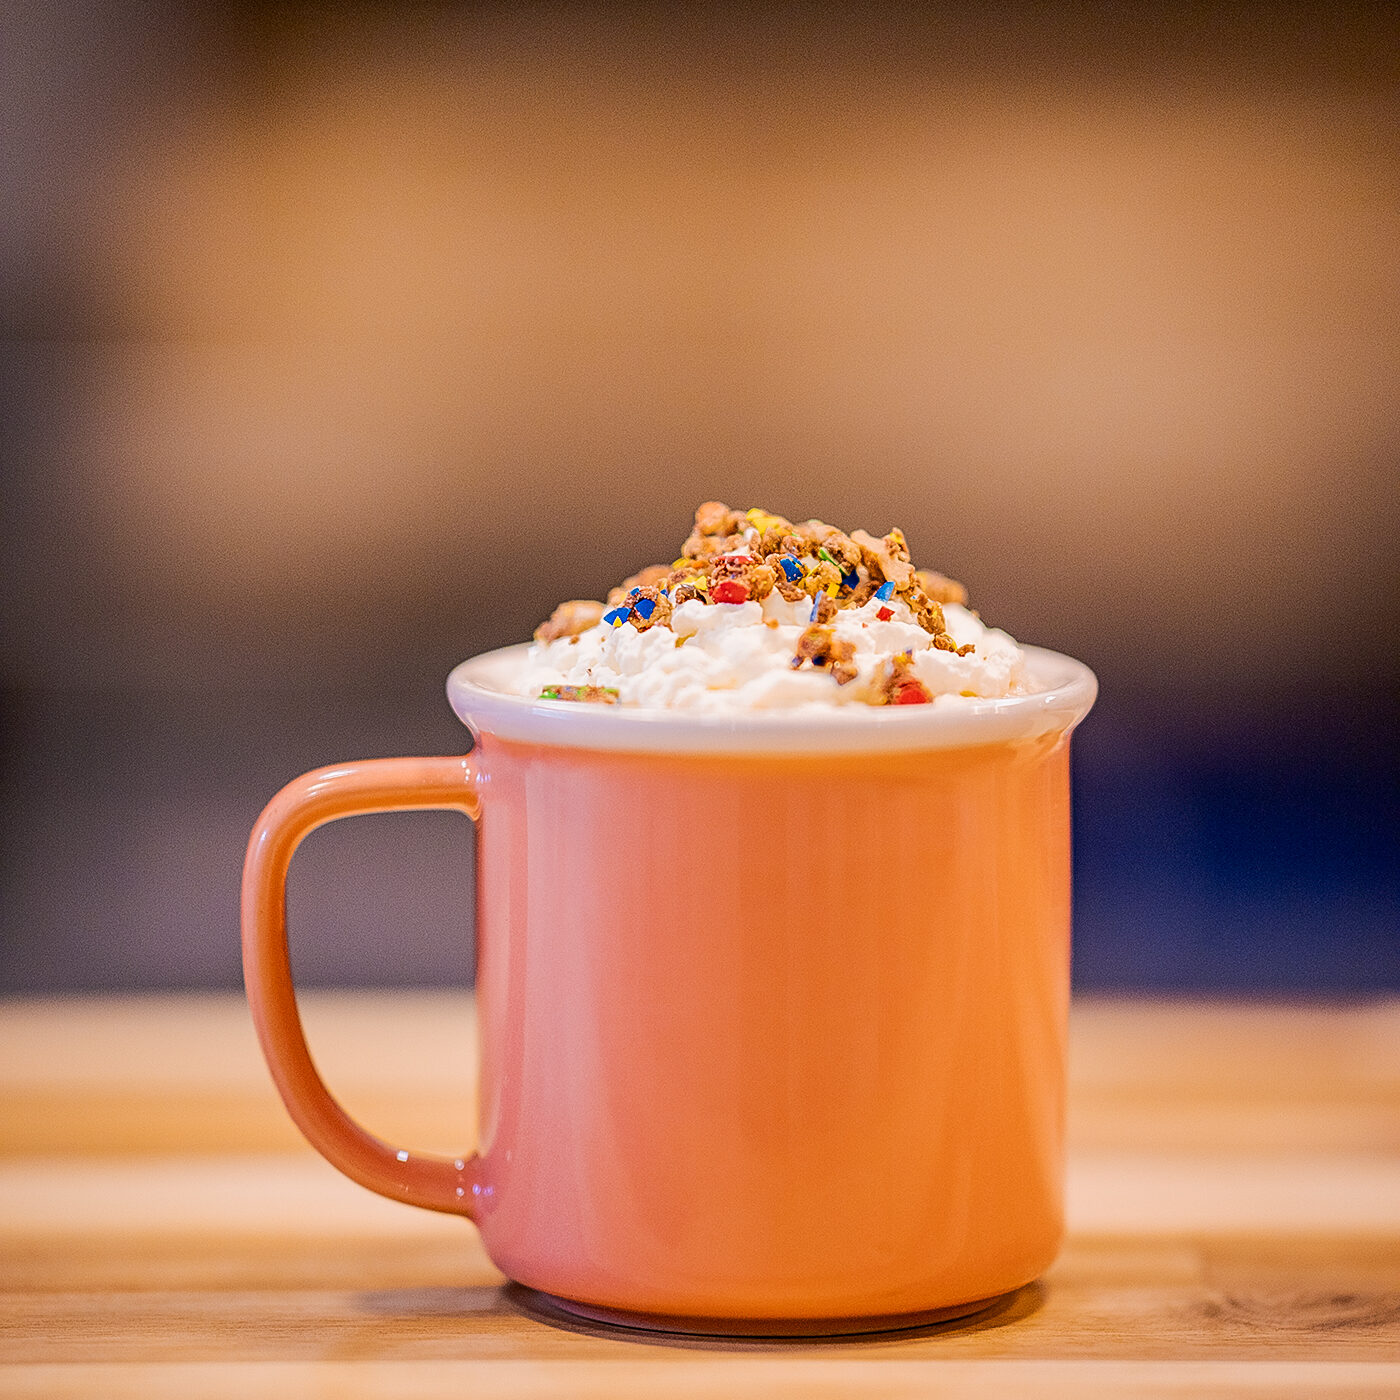 A small orange mug is topped with whipped cream and colourful crumbles of Reese's Pieces